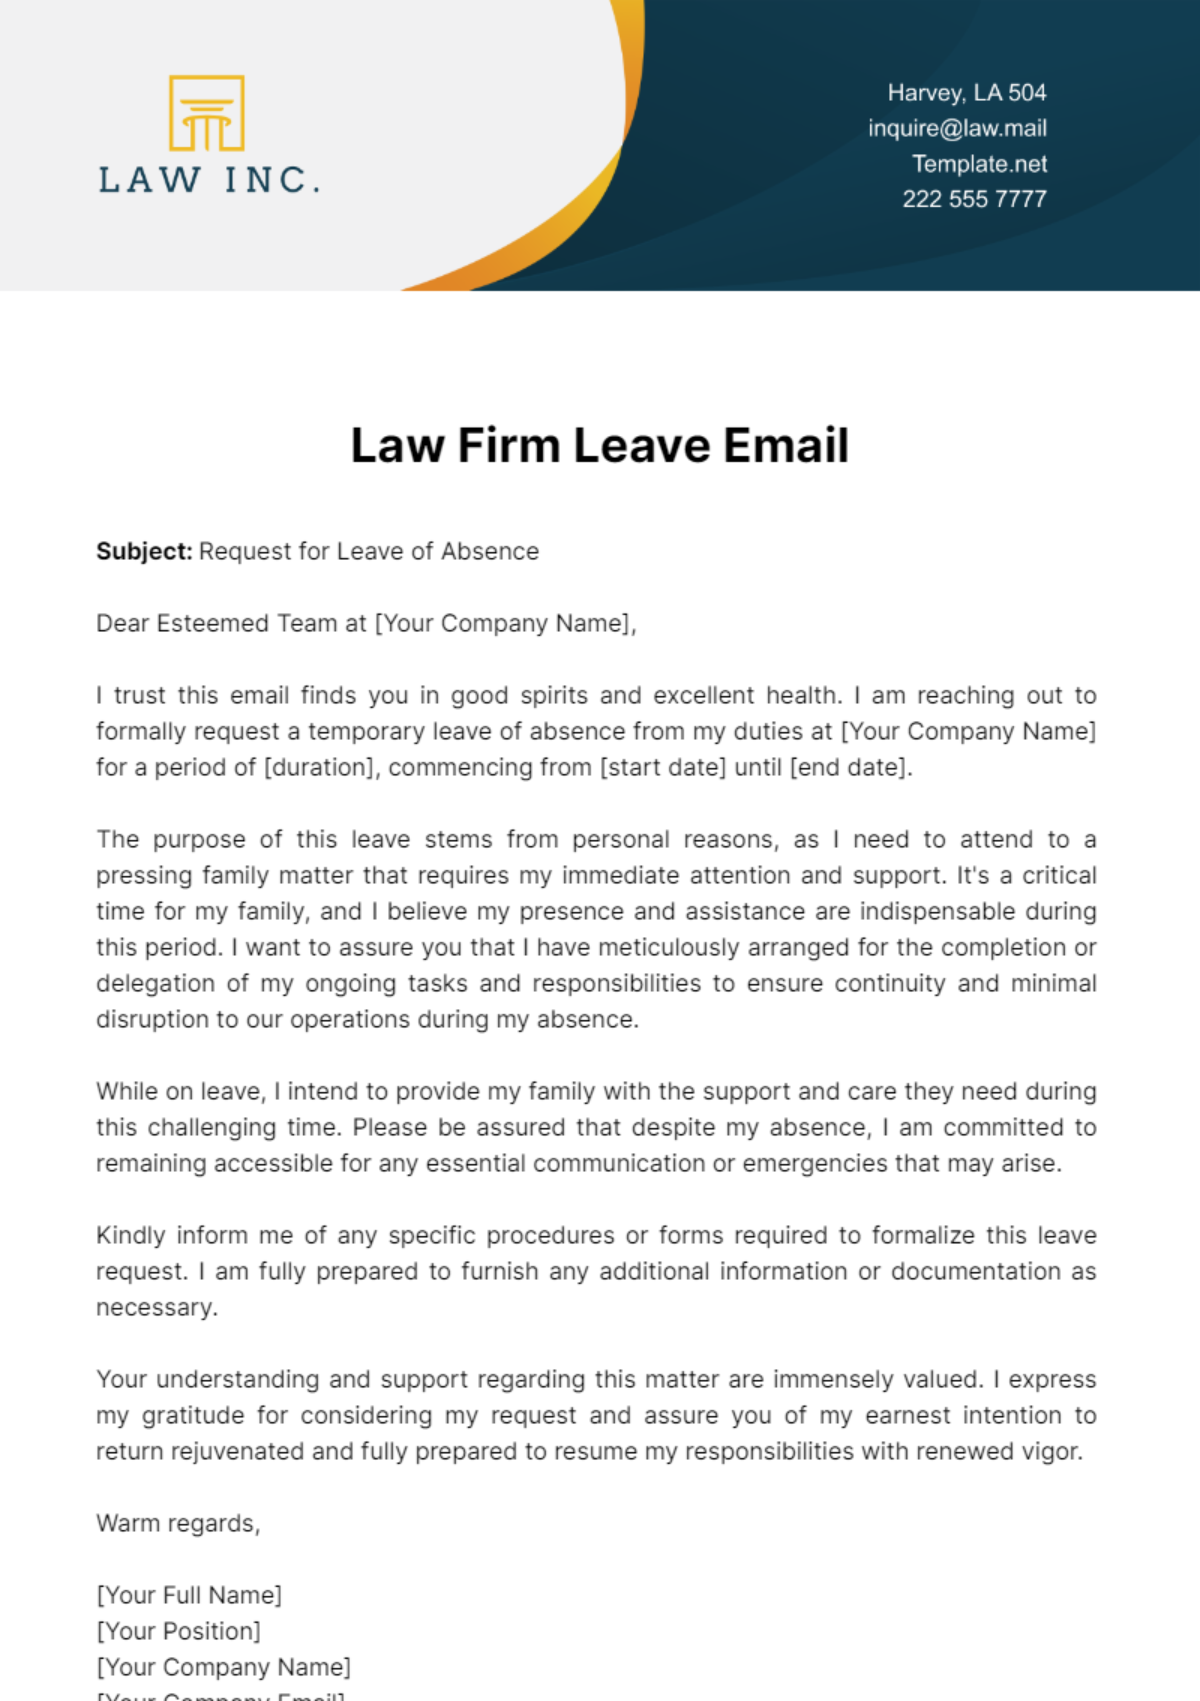 Free Law Firm Leave Email Template